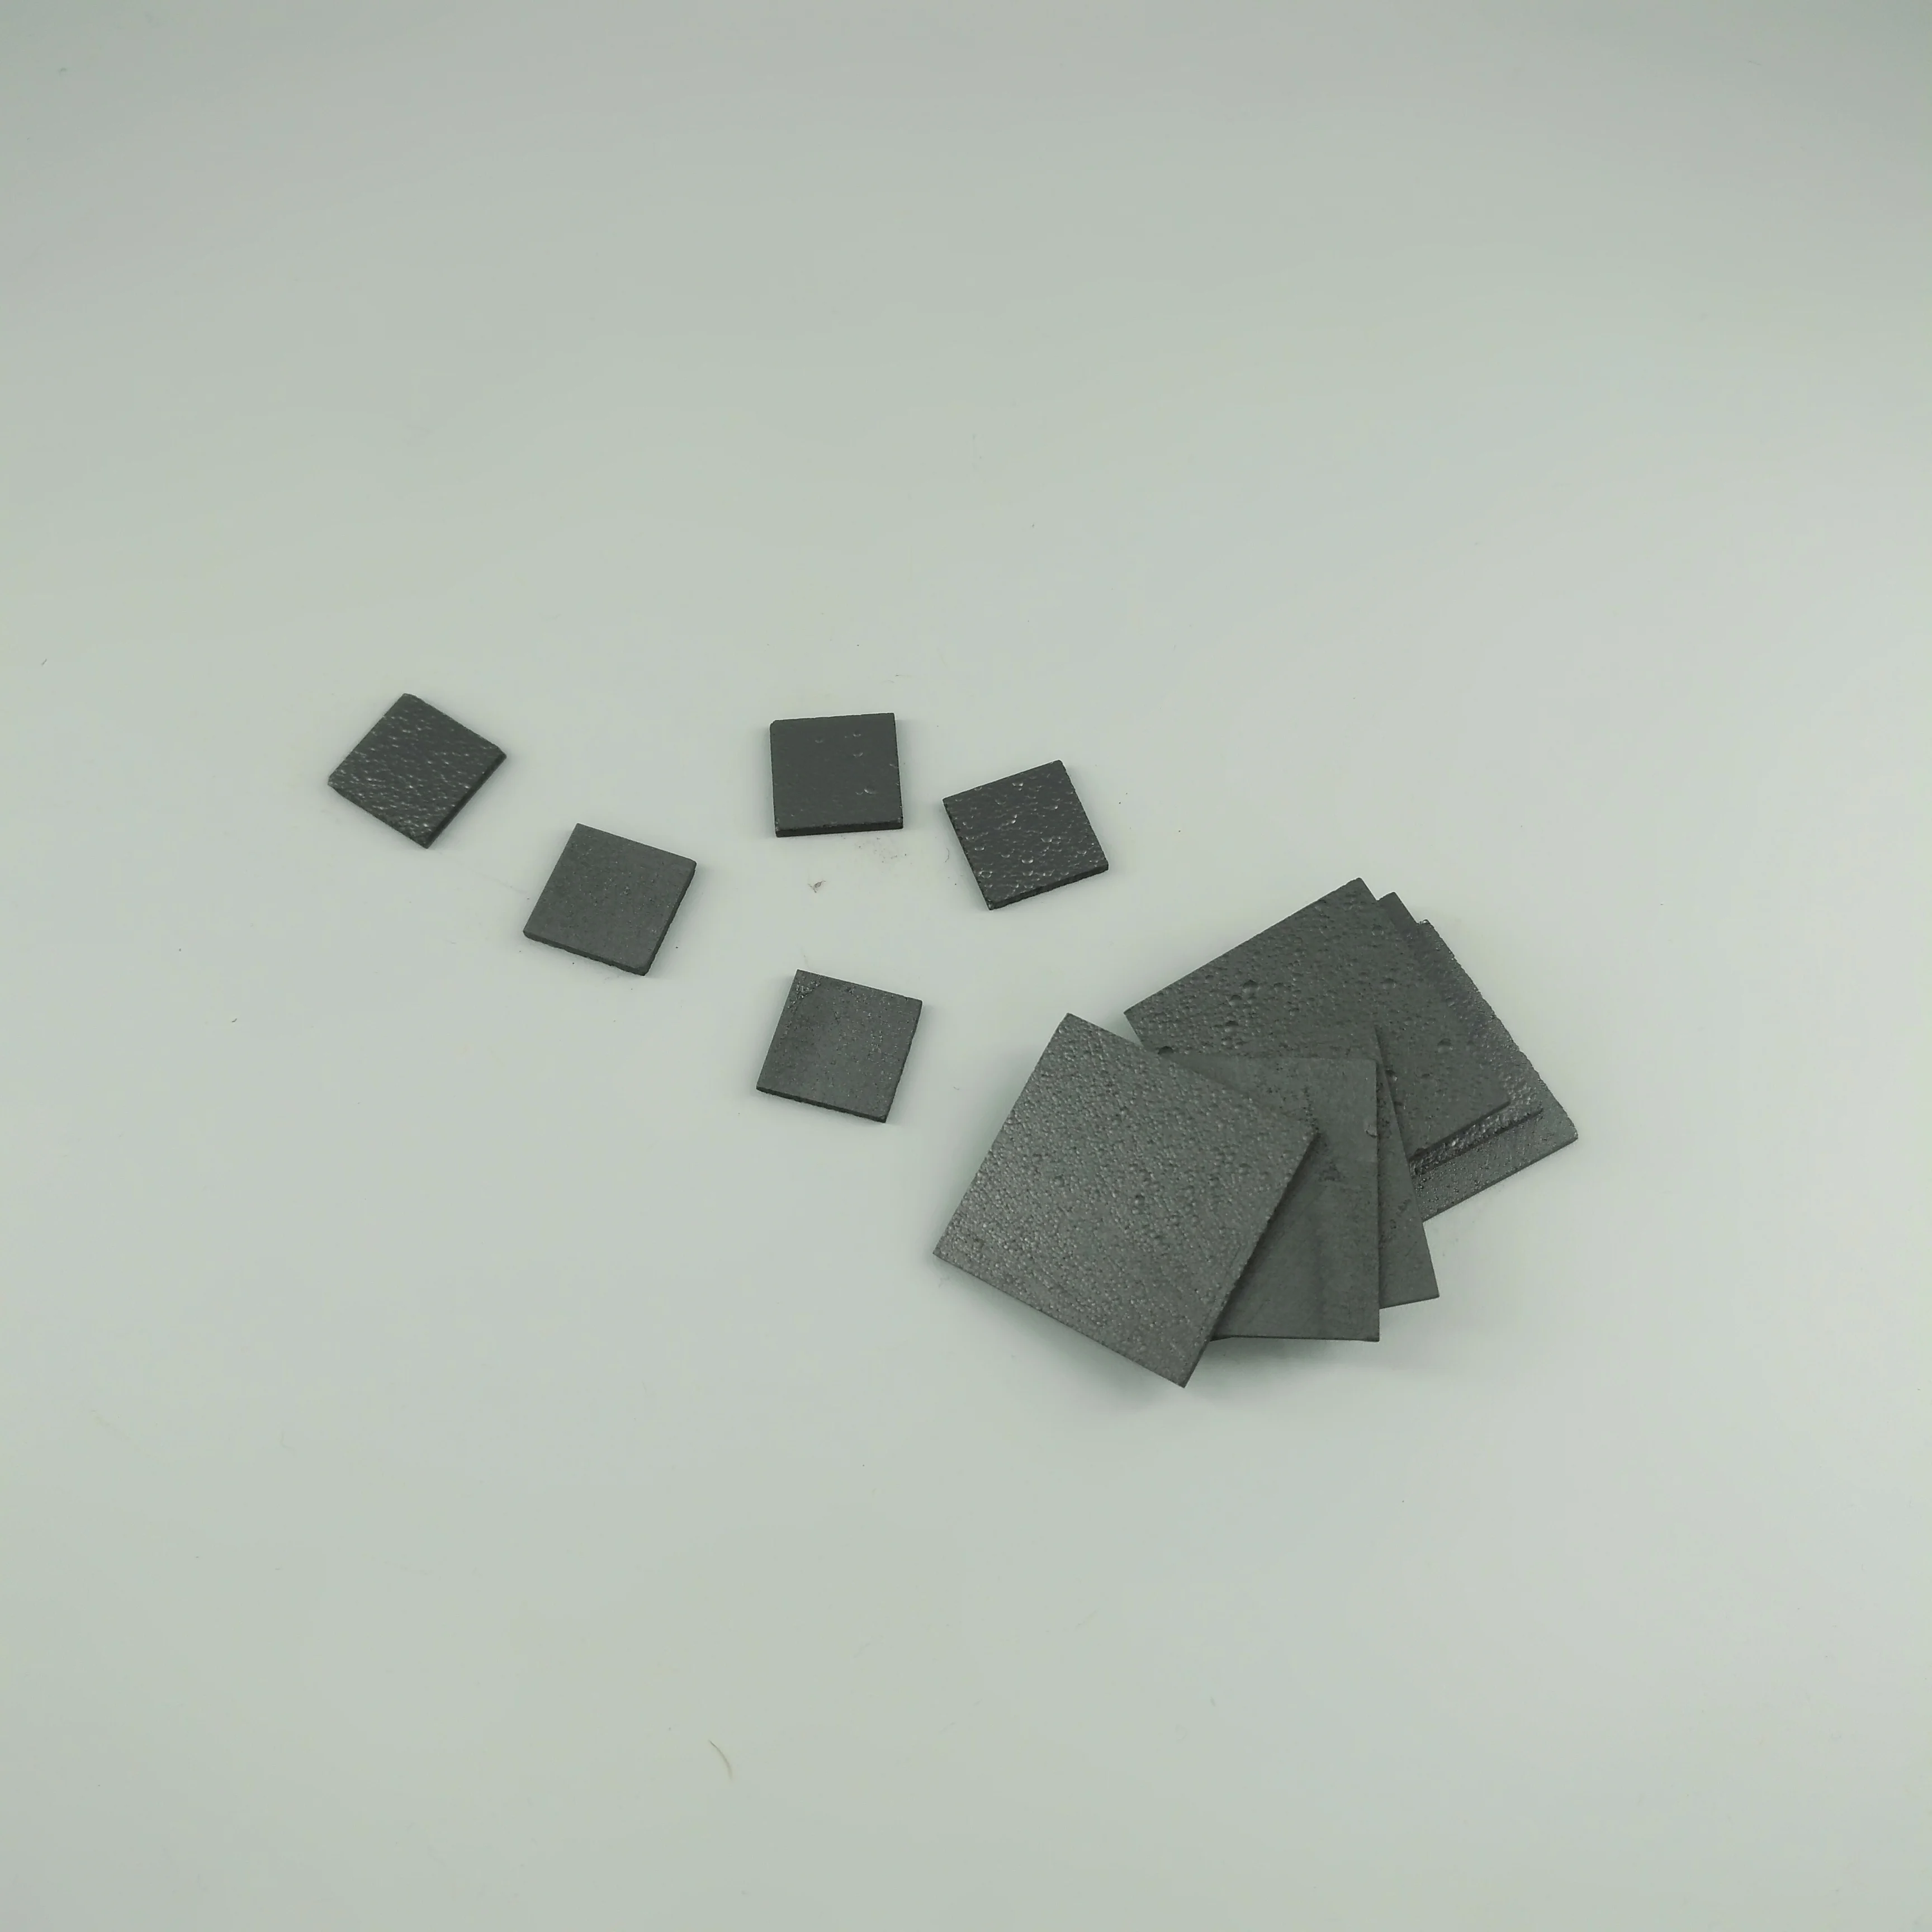 18x18x1mm with case Pyrolytic Graphite  for Magnetic Levitation 5 pcs 